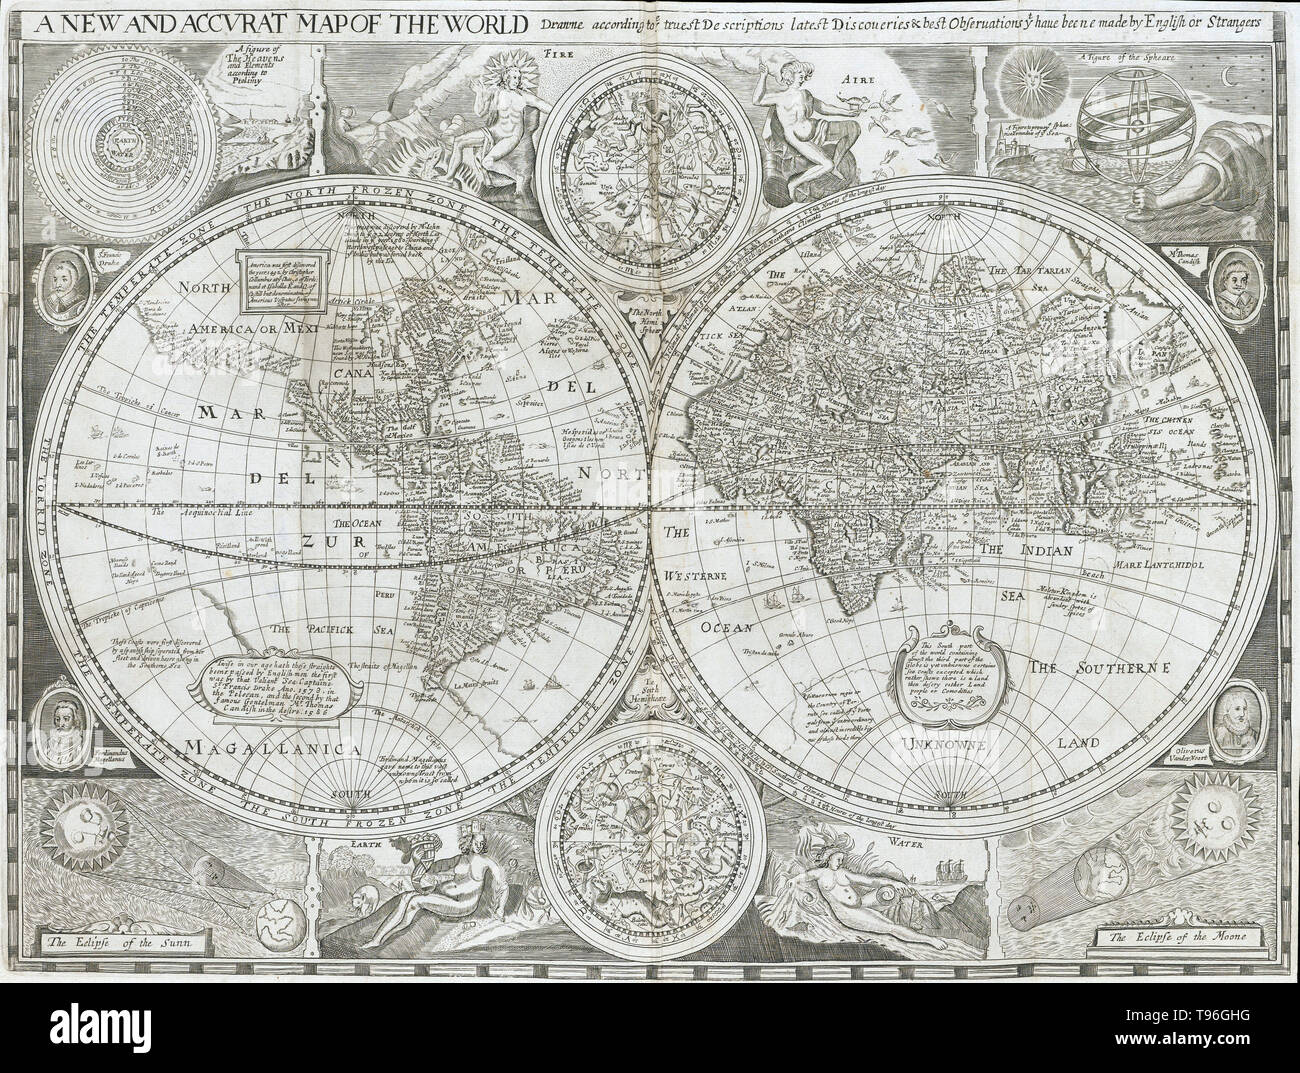 Map of the world from the Early printed book entitled Britain, or a chorographical description of the most flourishing kingdoms, England, Scotland, and Ireland, and the lands adjoining, out of the depth of antiquity  beautified with maps of the several Shires of England written by William Camden. William Camden (May 2, 1551 - November 9, 1623) was an English antiquarian, historian, and topographer. Stock Photo